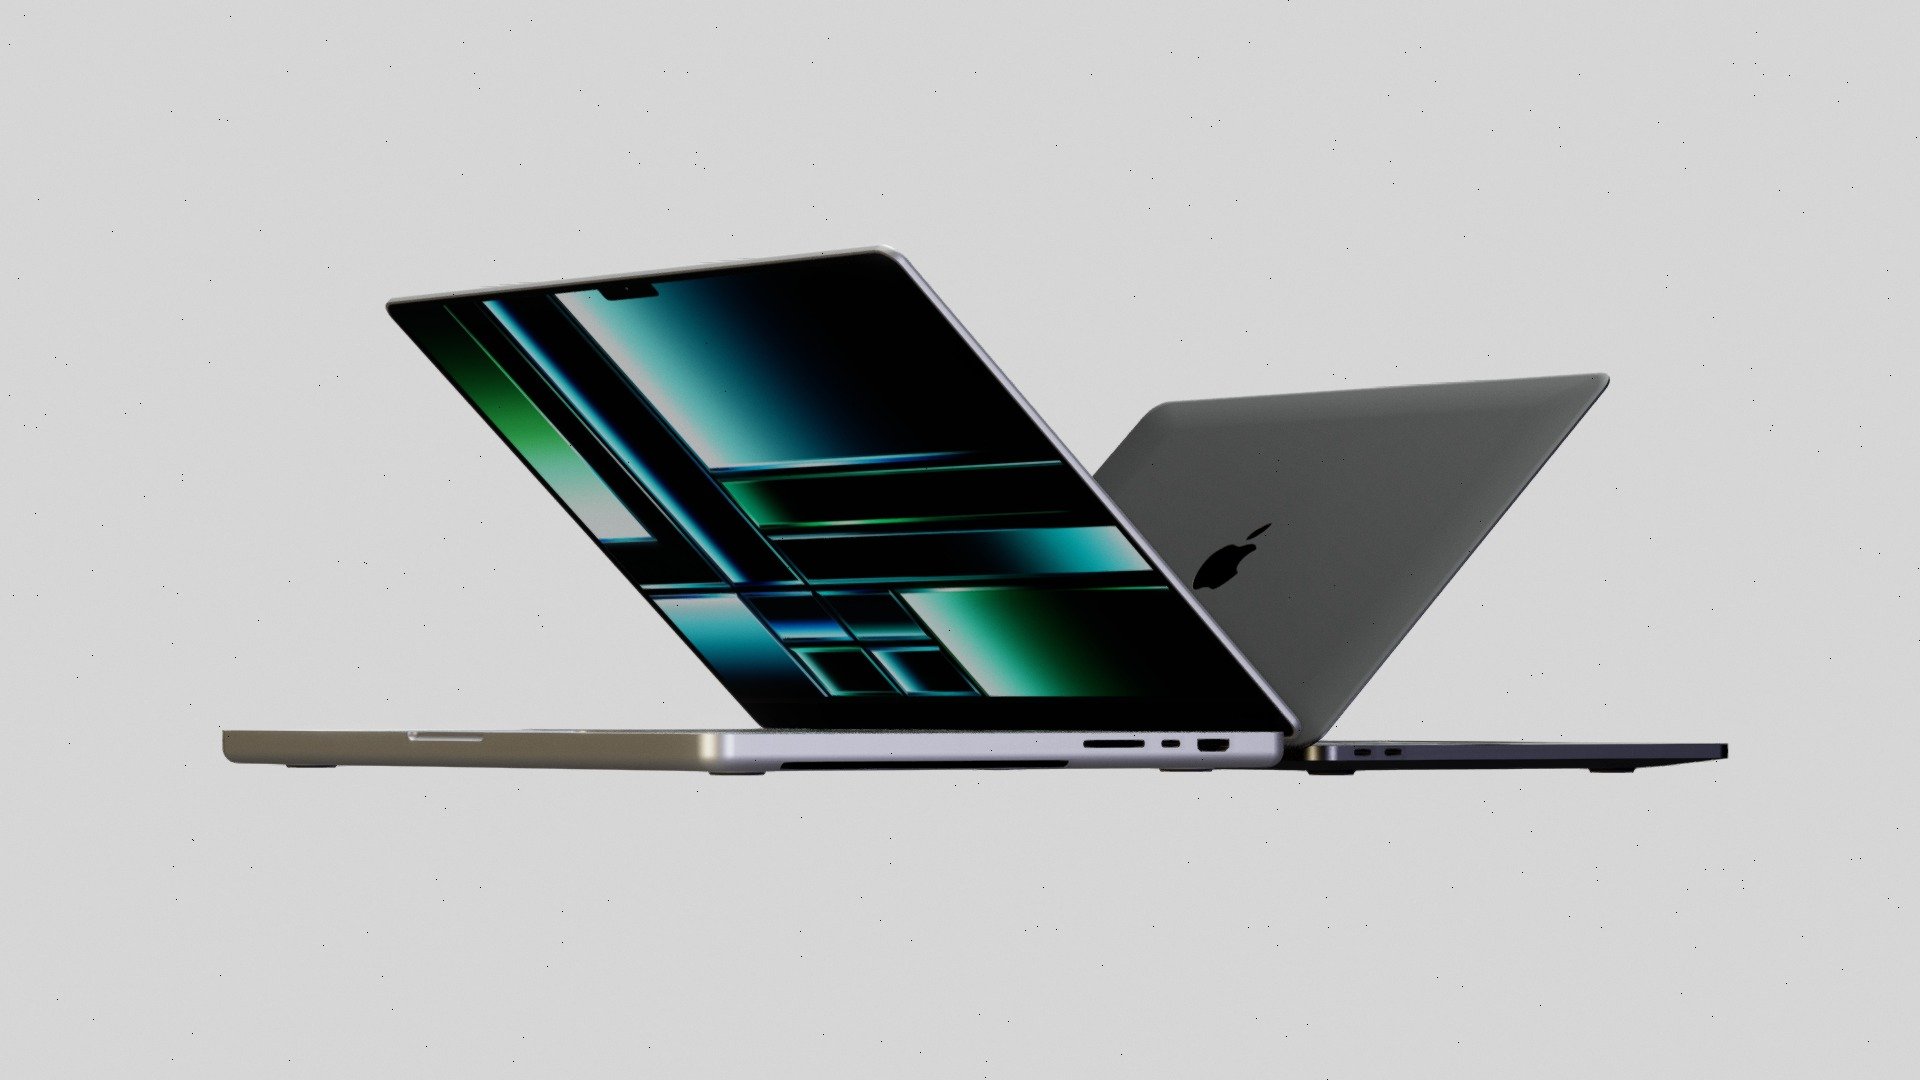 Highly detailed models of the 16 and 13 inch Apple MacBook Pro laptops powered by the M2 chip. Get up close and personal with Pros! Also includes low poly versions (under 10k tris) 🙃

As far as I can tell, this is the only 3D model of a 16